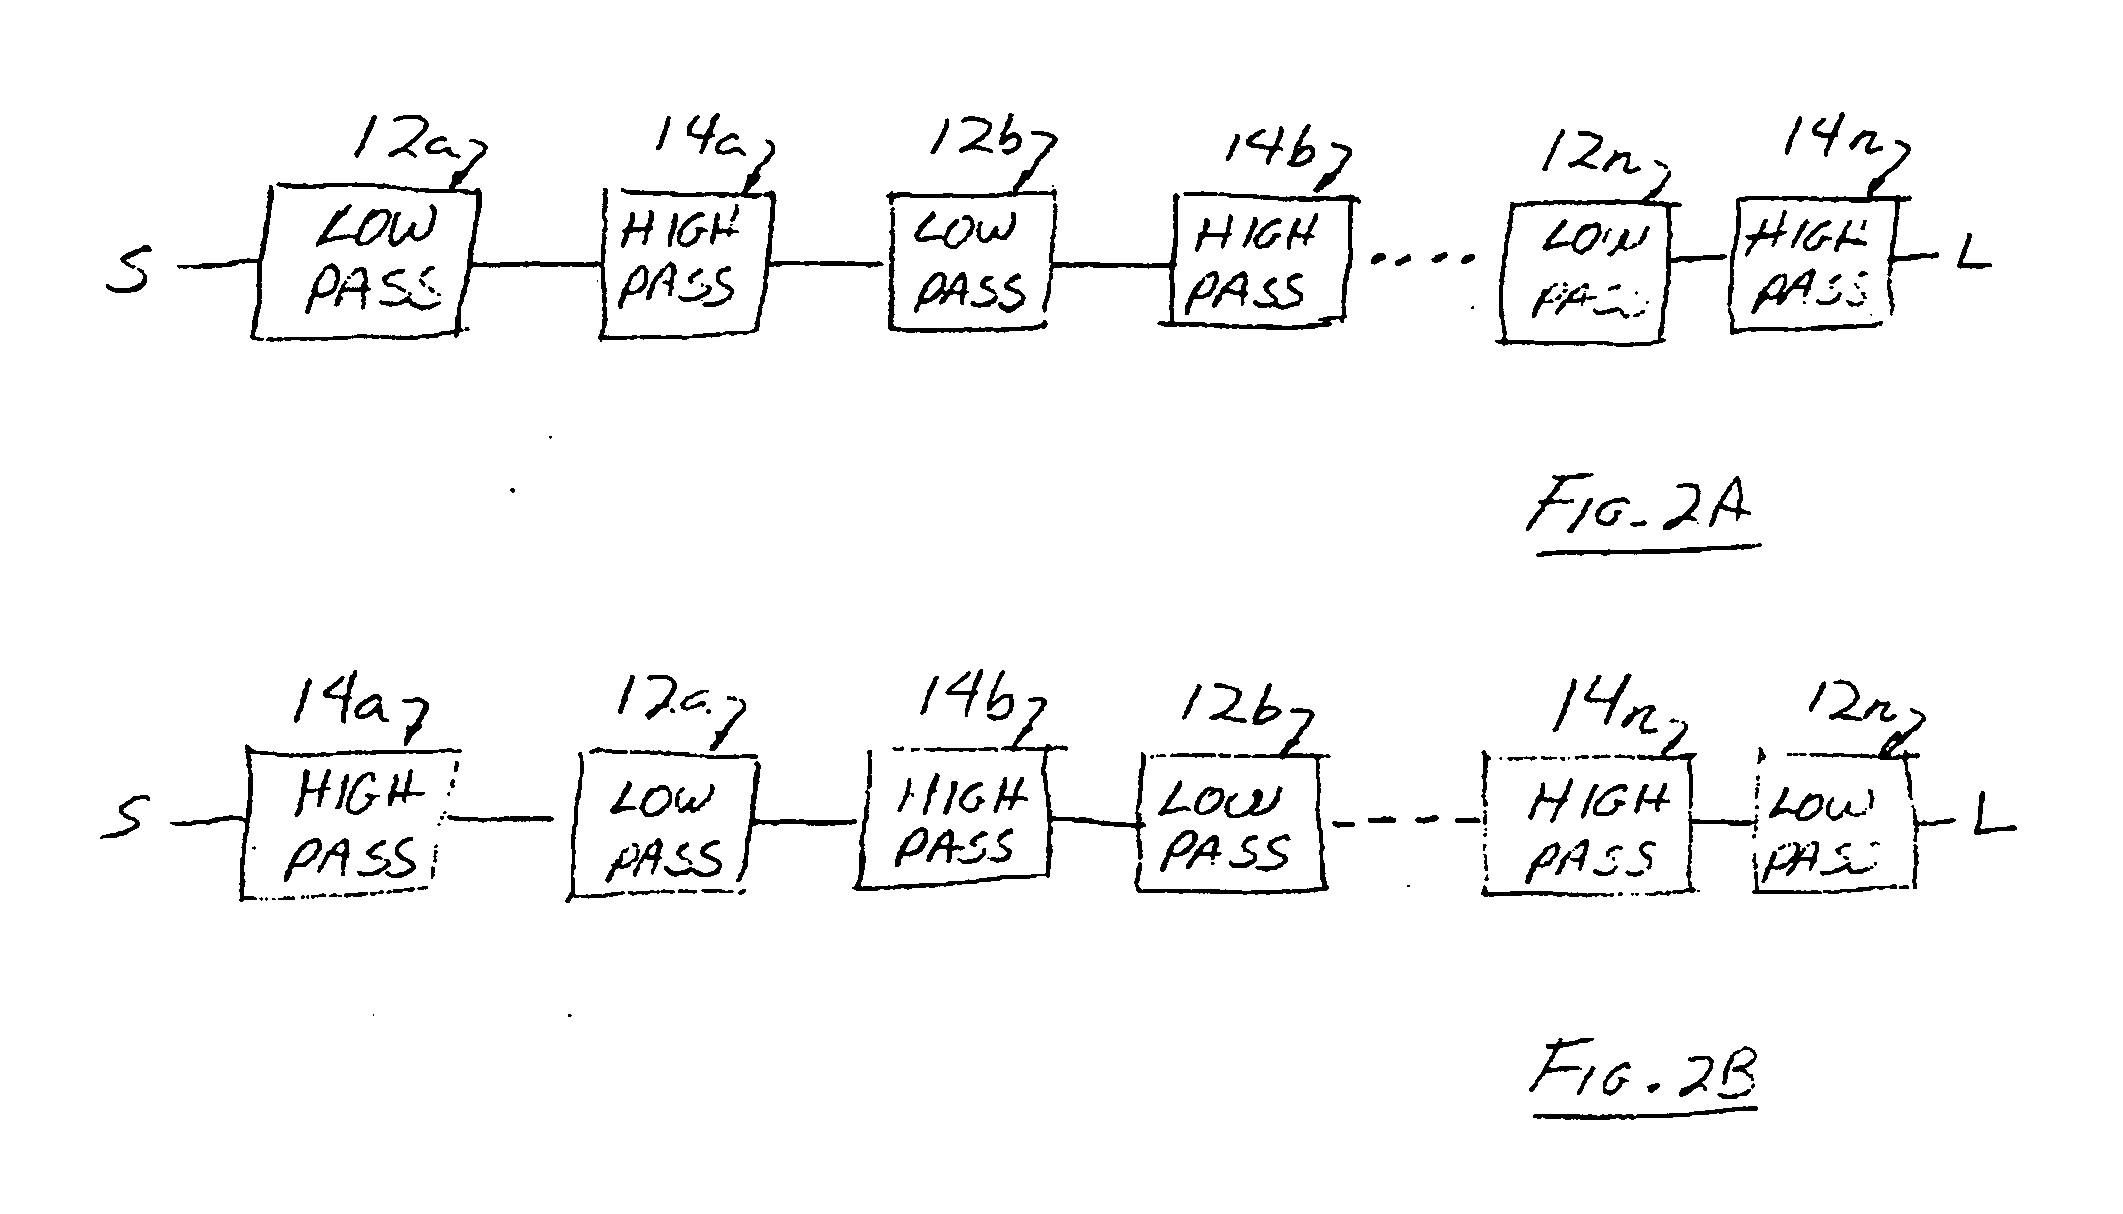 Broadband impedance matching circuit using high pass and low pass filter sections